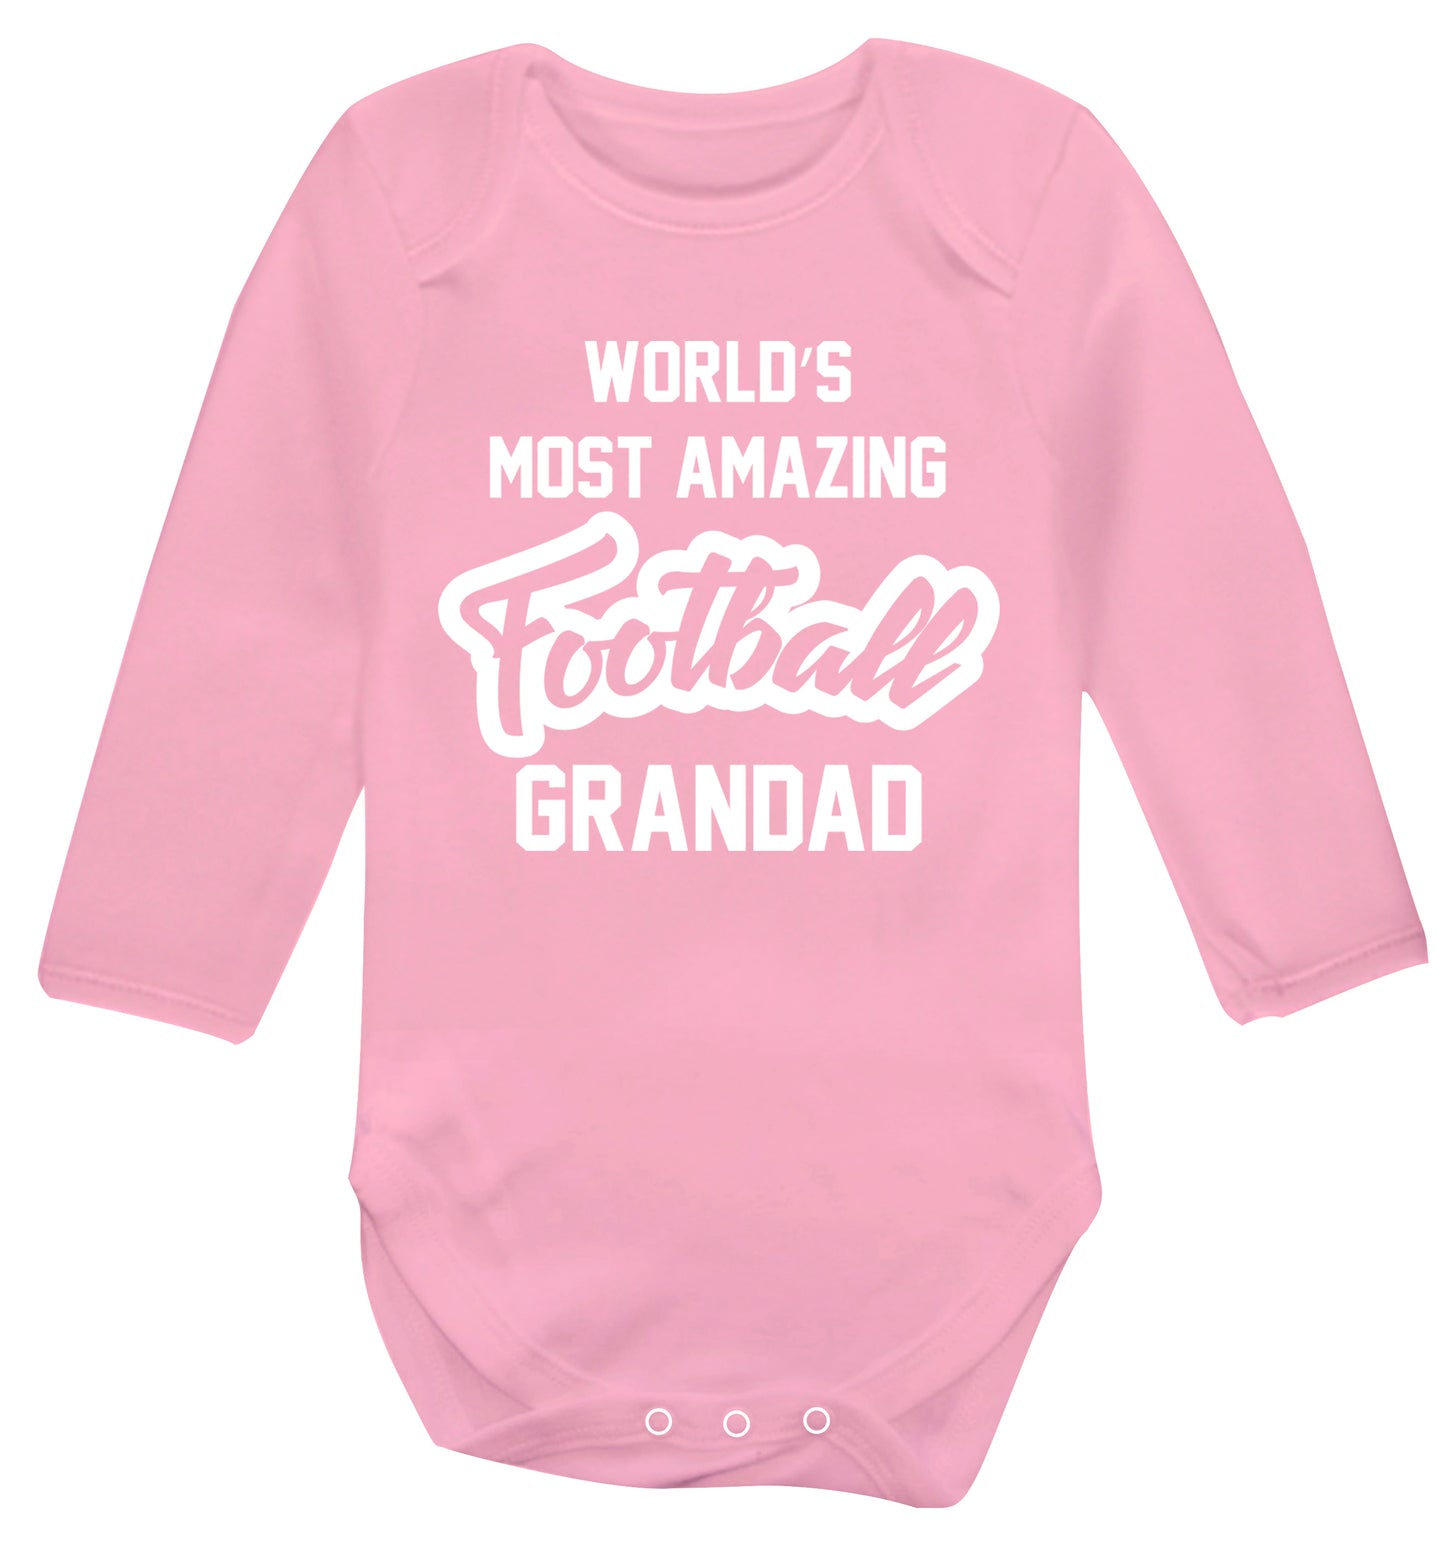 Worlds most amazing football grandad Baby Vest long sleeved pale pink 6-12 months